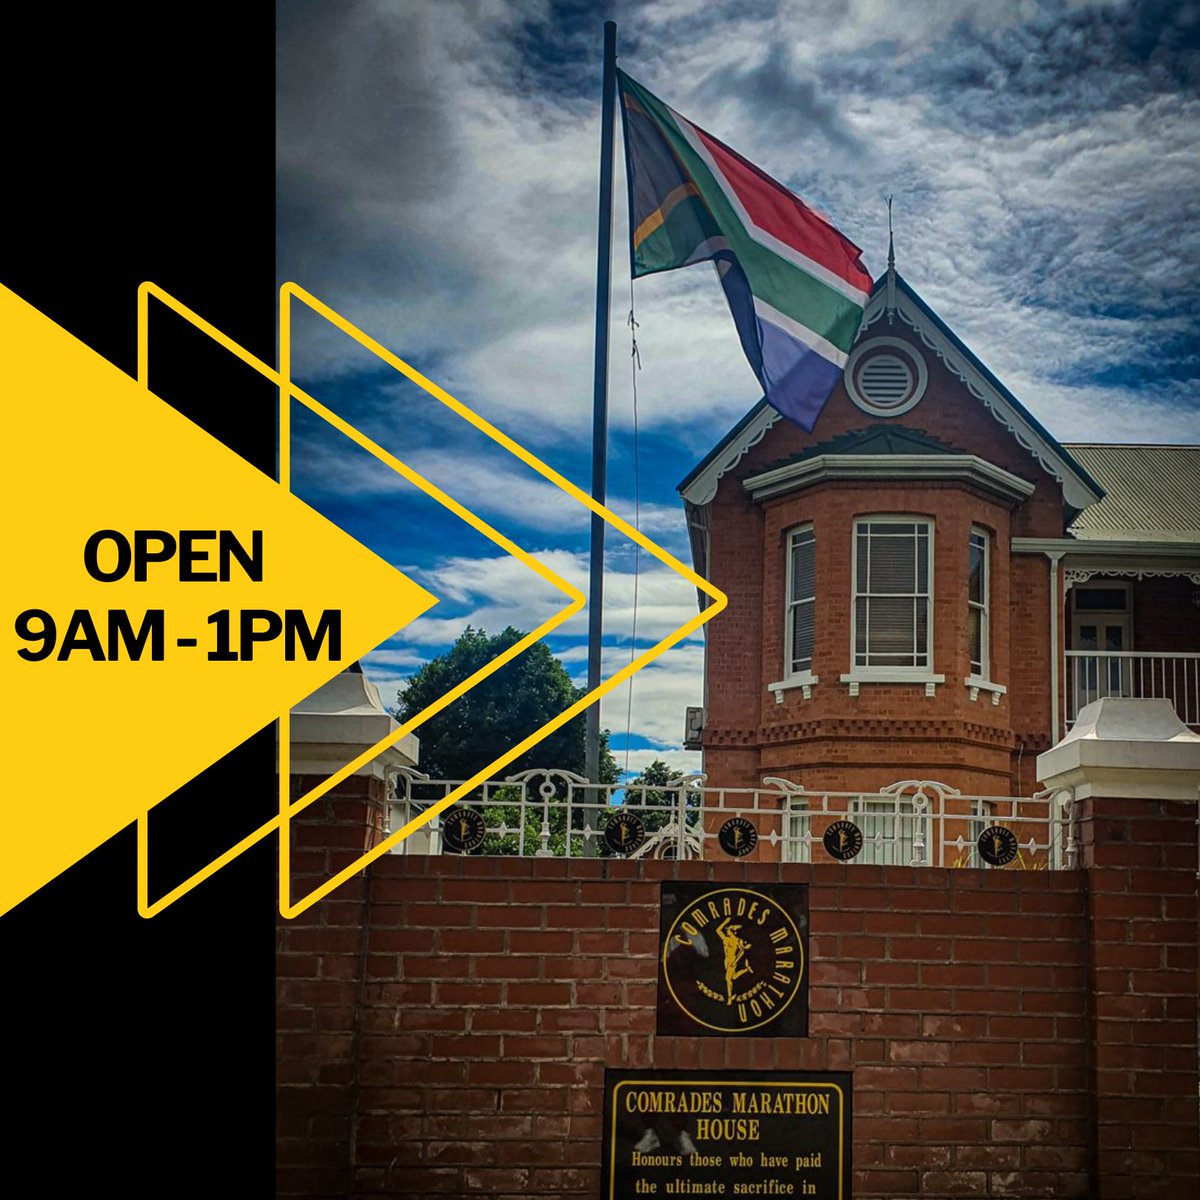 The Comrades Marathon Museum will be open on a Saturday! So, save the date and pop in on the 18th of May, which is also International Museum Day, and come and say hello! We will be open between 9am and 1pm! #ComradesMuseum #Museum #TheUltimateHumanRace